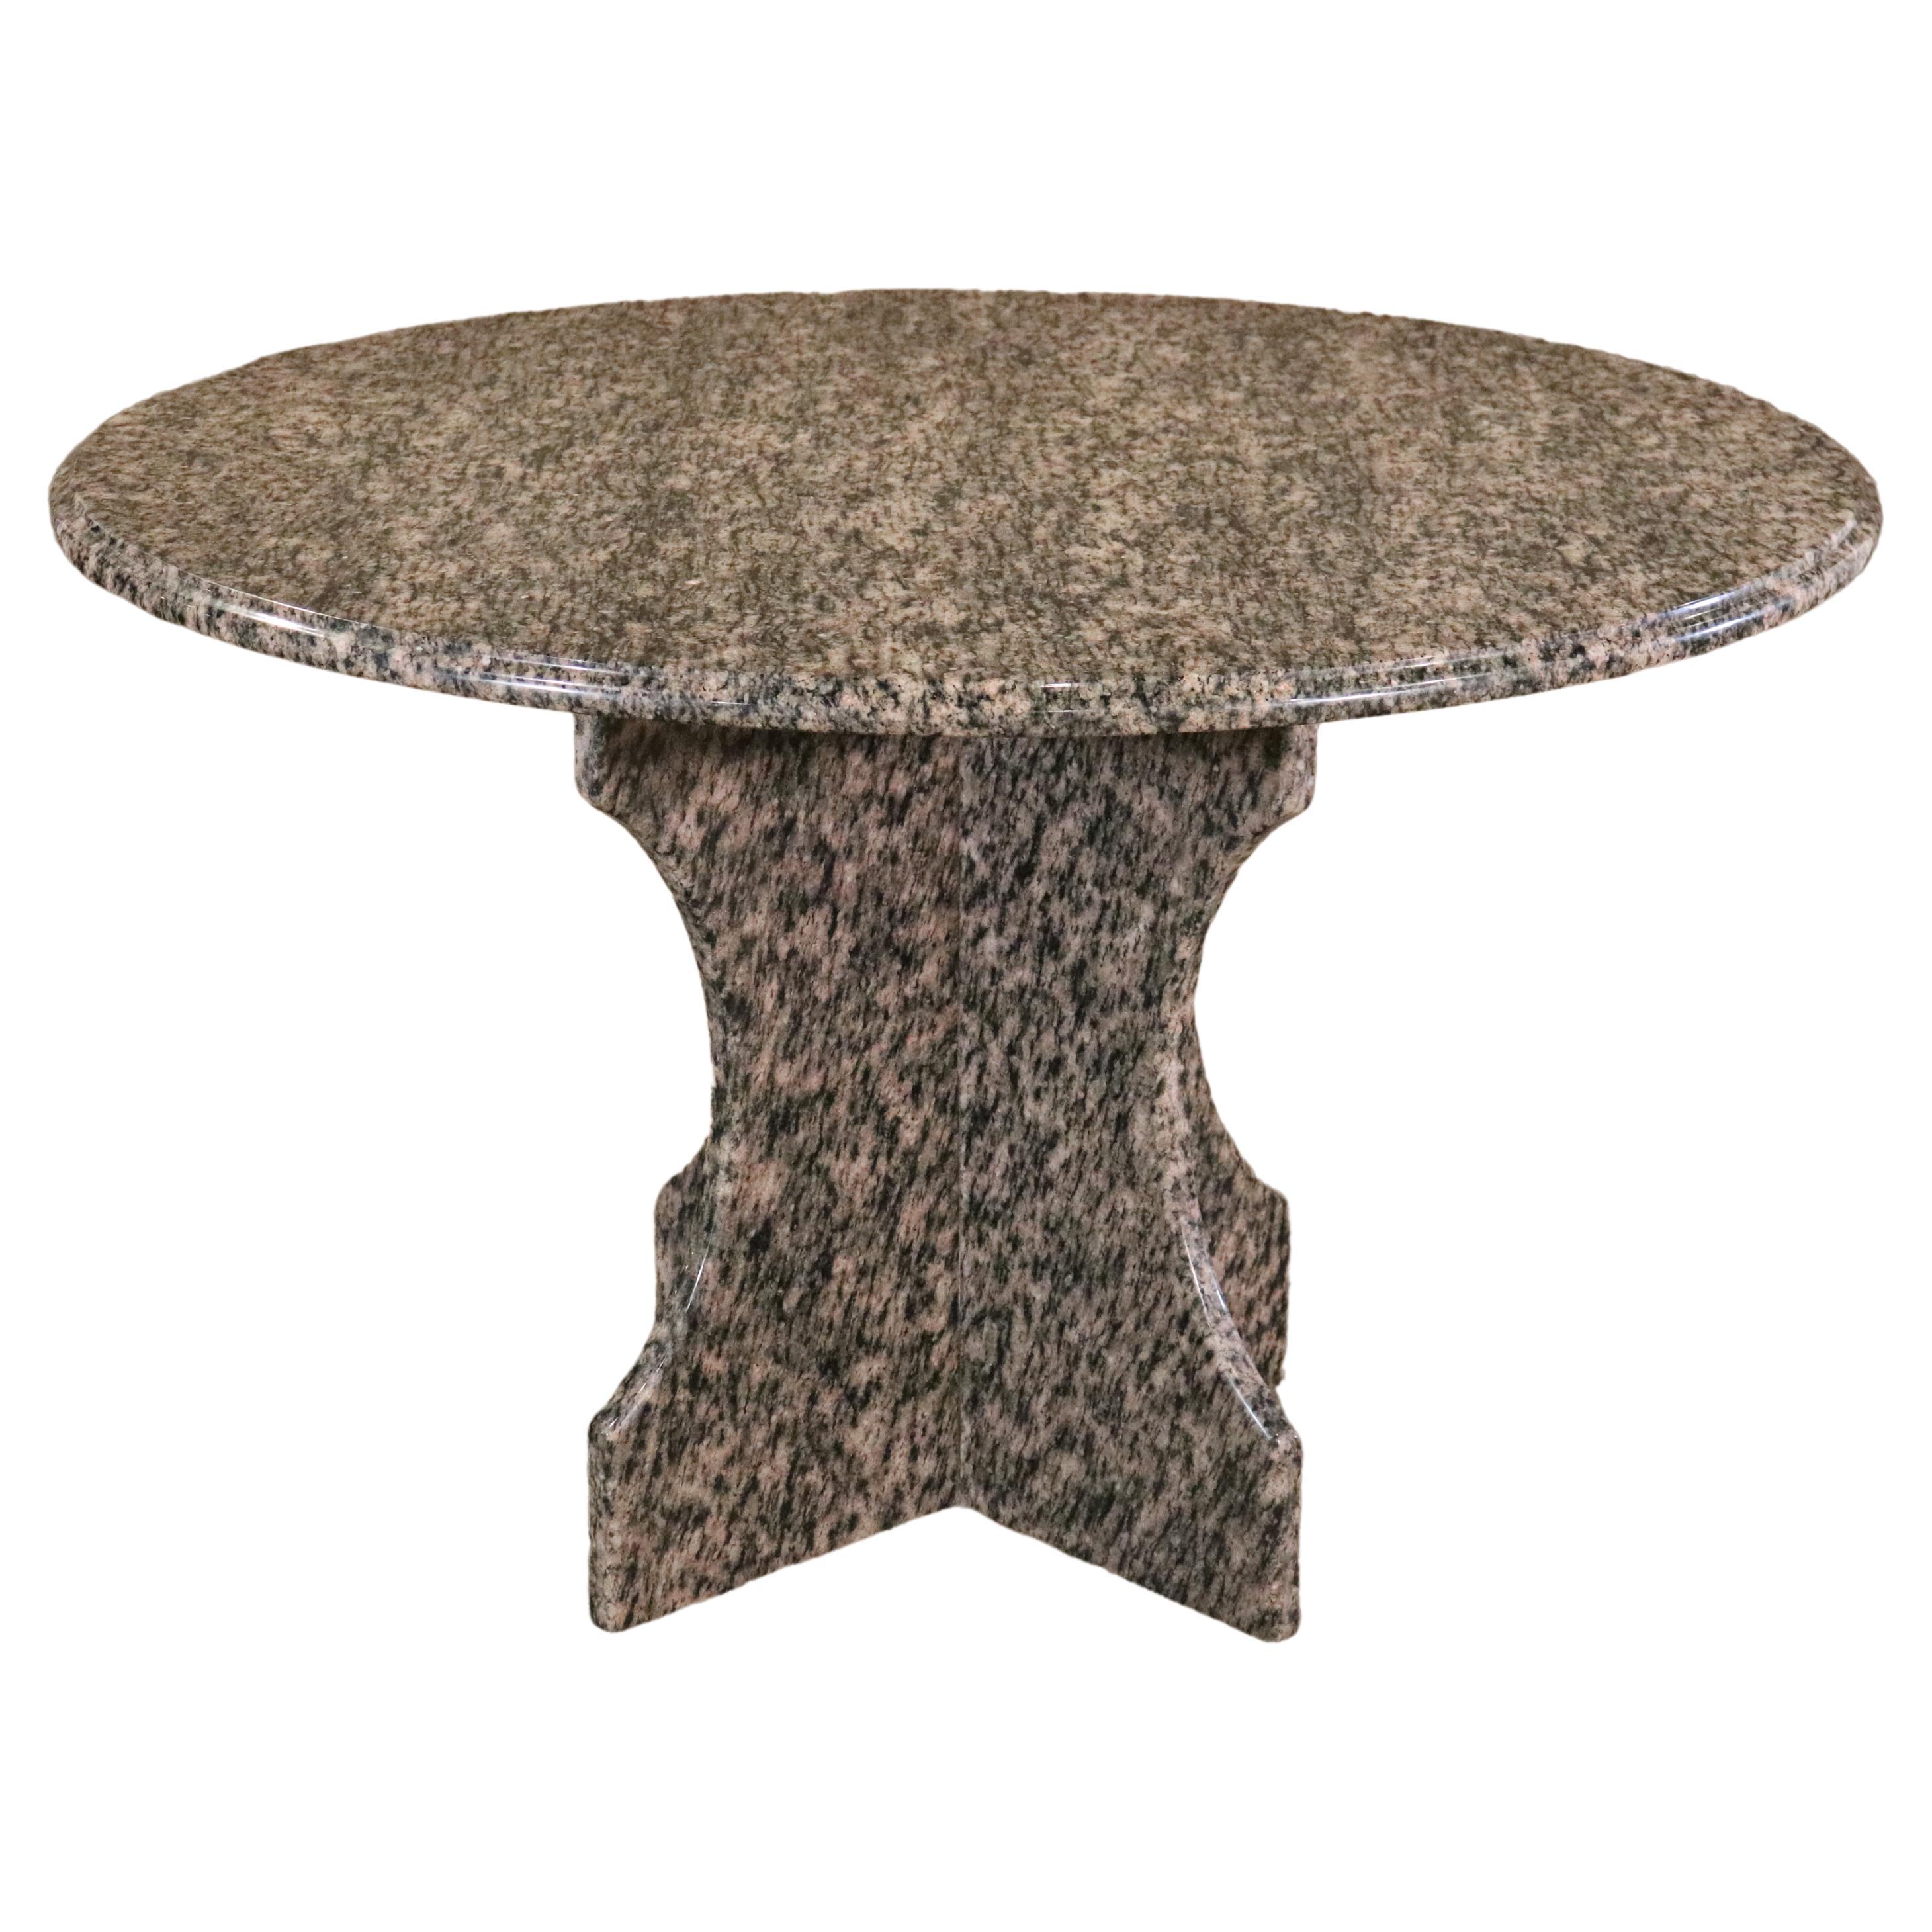 Victoria Stone Round Dining Table 60 - Harbour